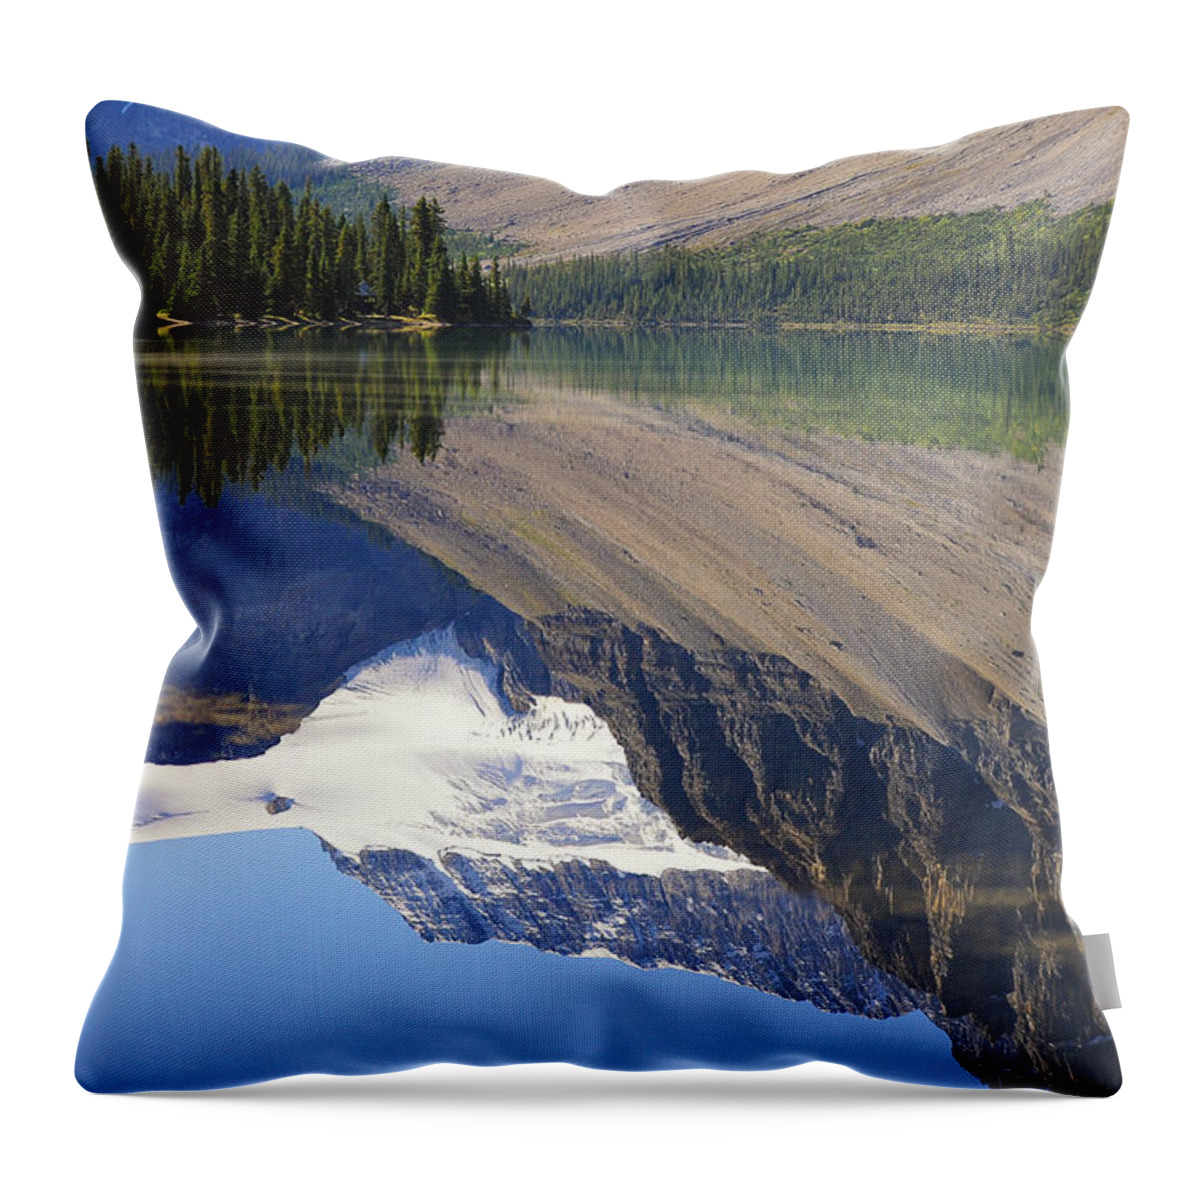 Banff National Park Throw Pillow featuring the photograph Mirror Lake Banff National Park Canada by Mary Lee Dereske